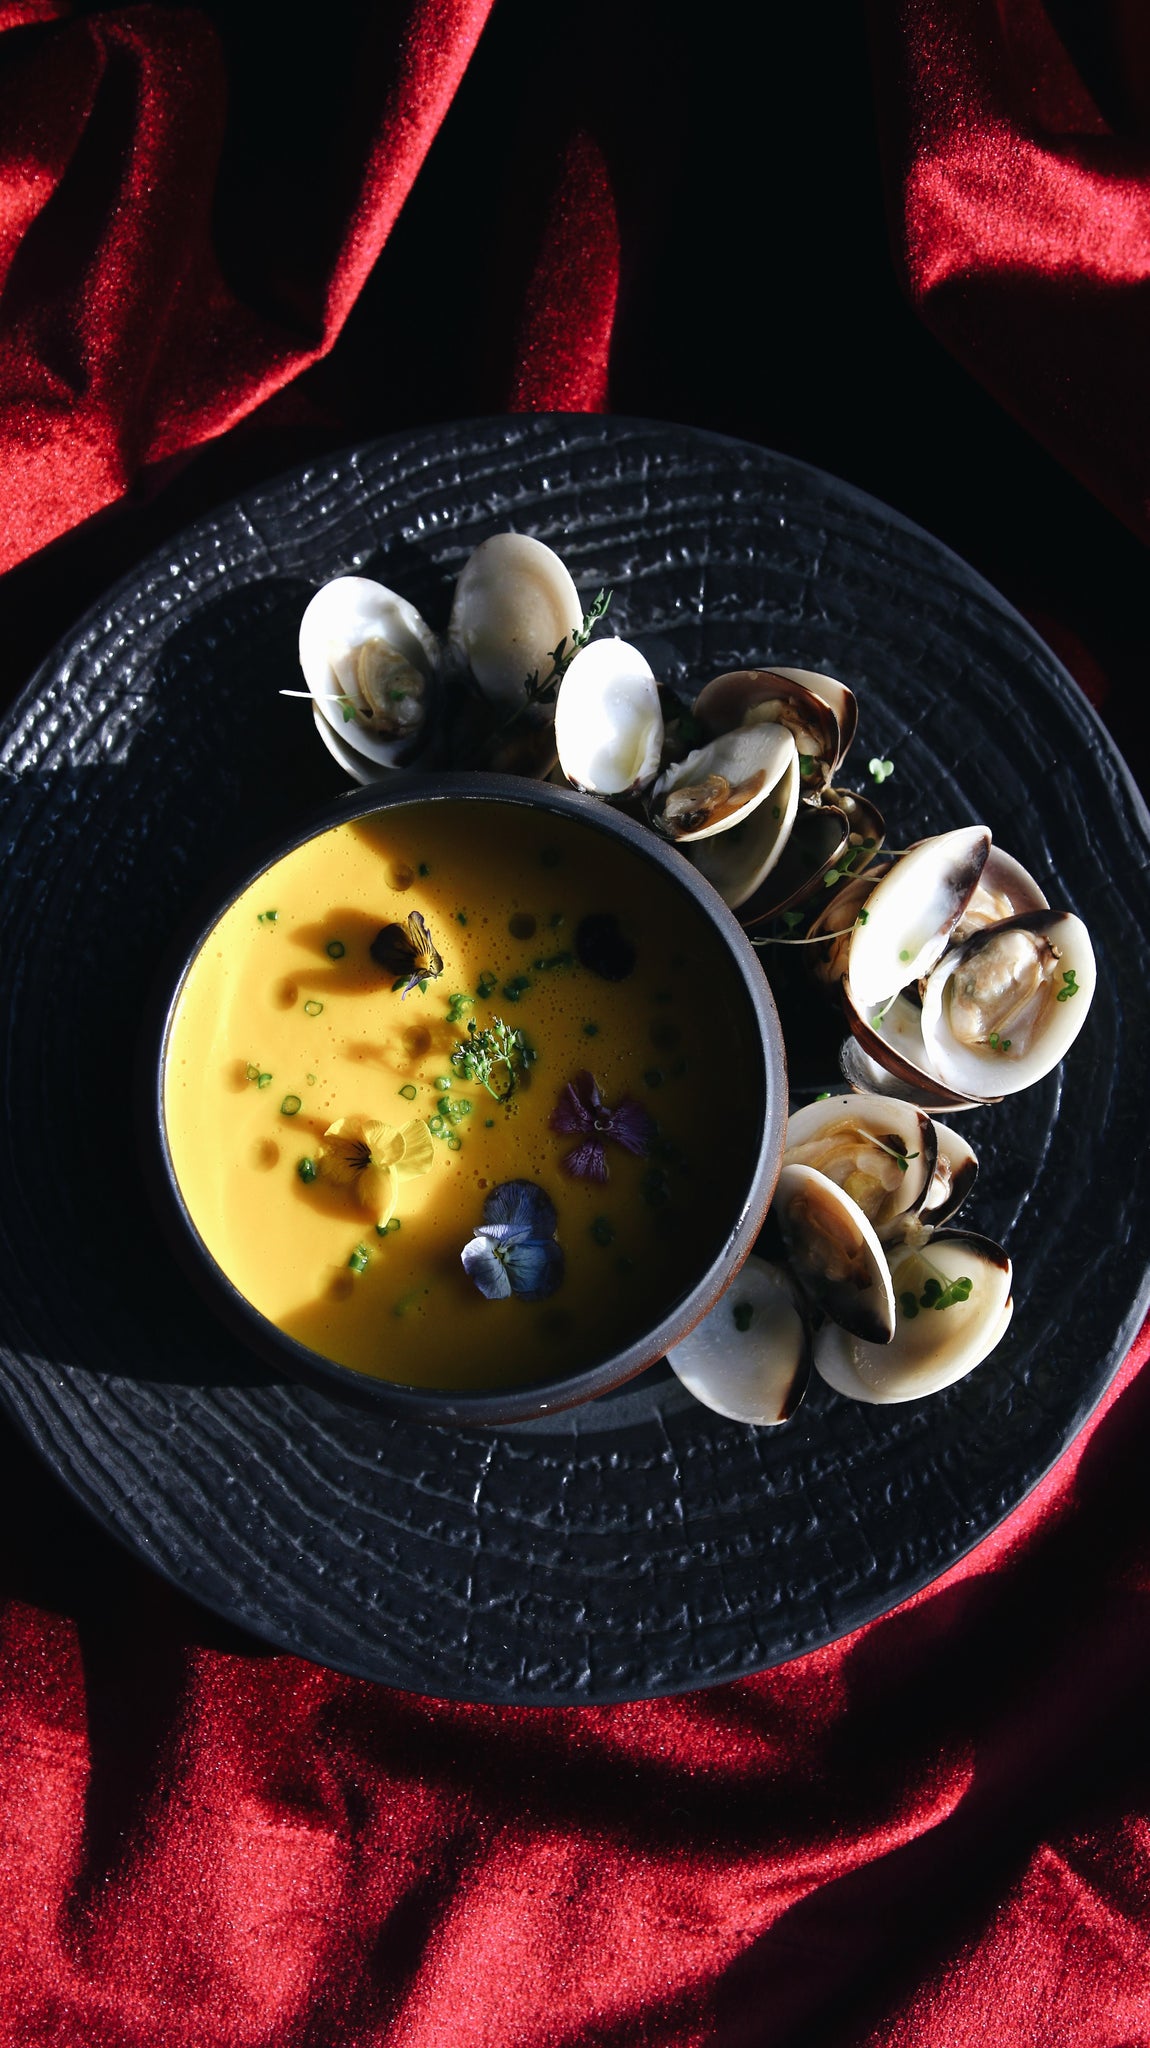 Warm up to seafood during the cold months.